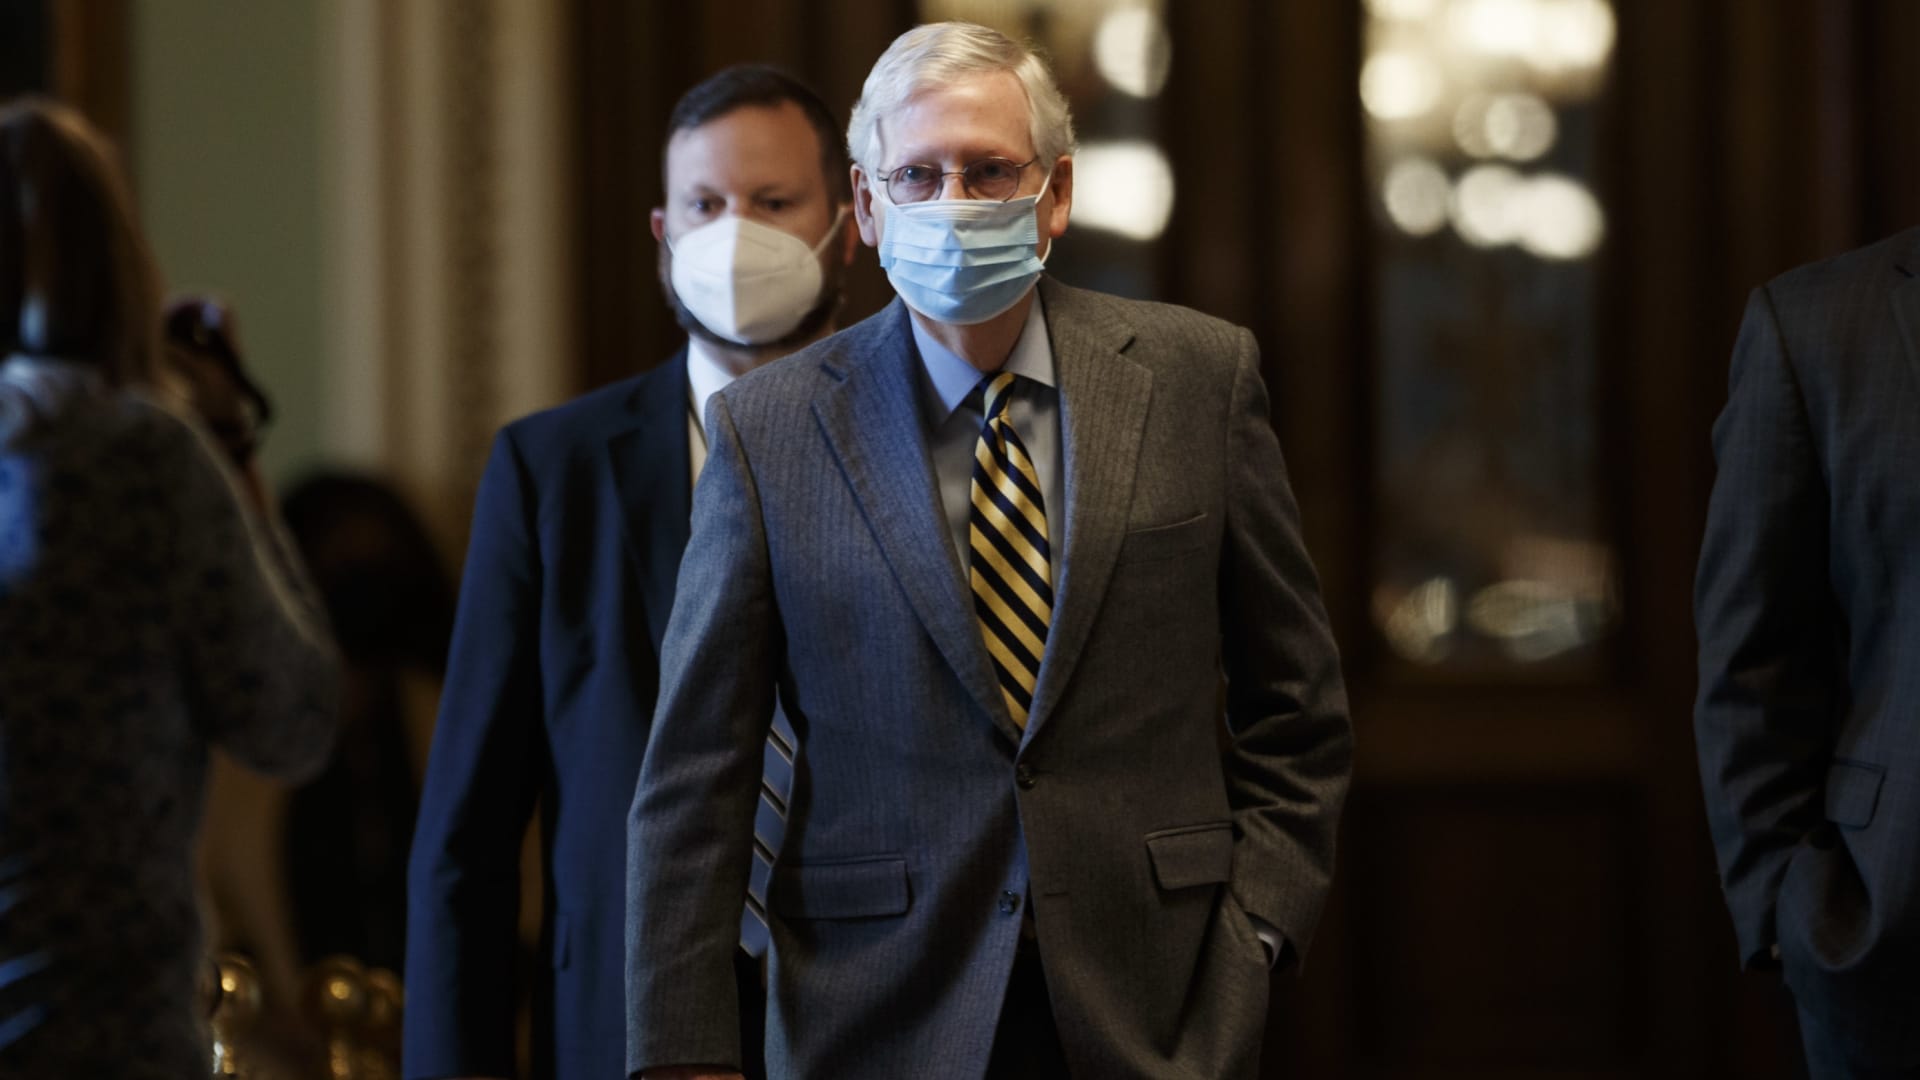 Senate Majority Leader Mitch McConnell, a Republican from Kentucky, center, wears a protective mask while walking through the U.S. Capitol in Washington, D.C., U.S. on Wednesday, Dec. 30, 2020.